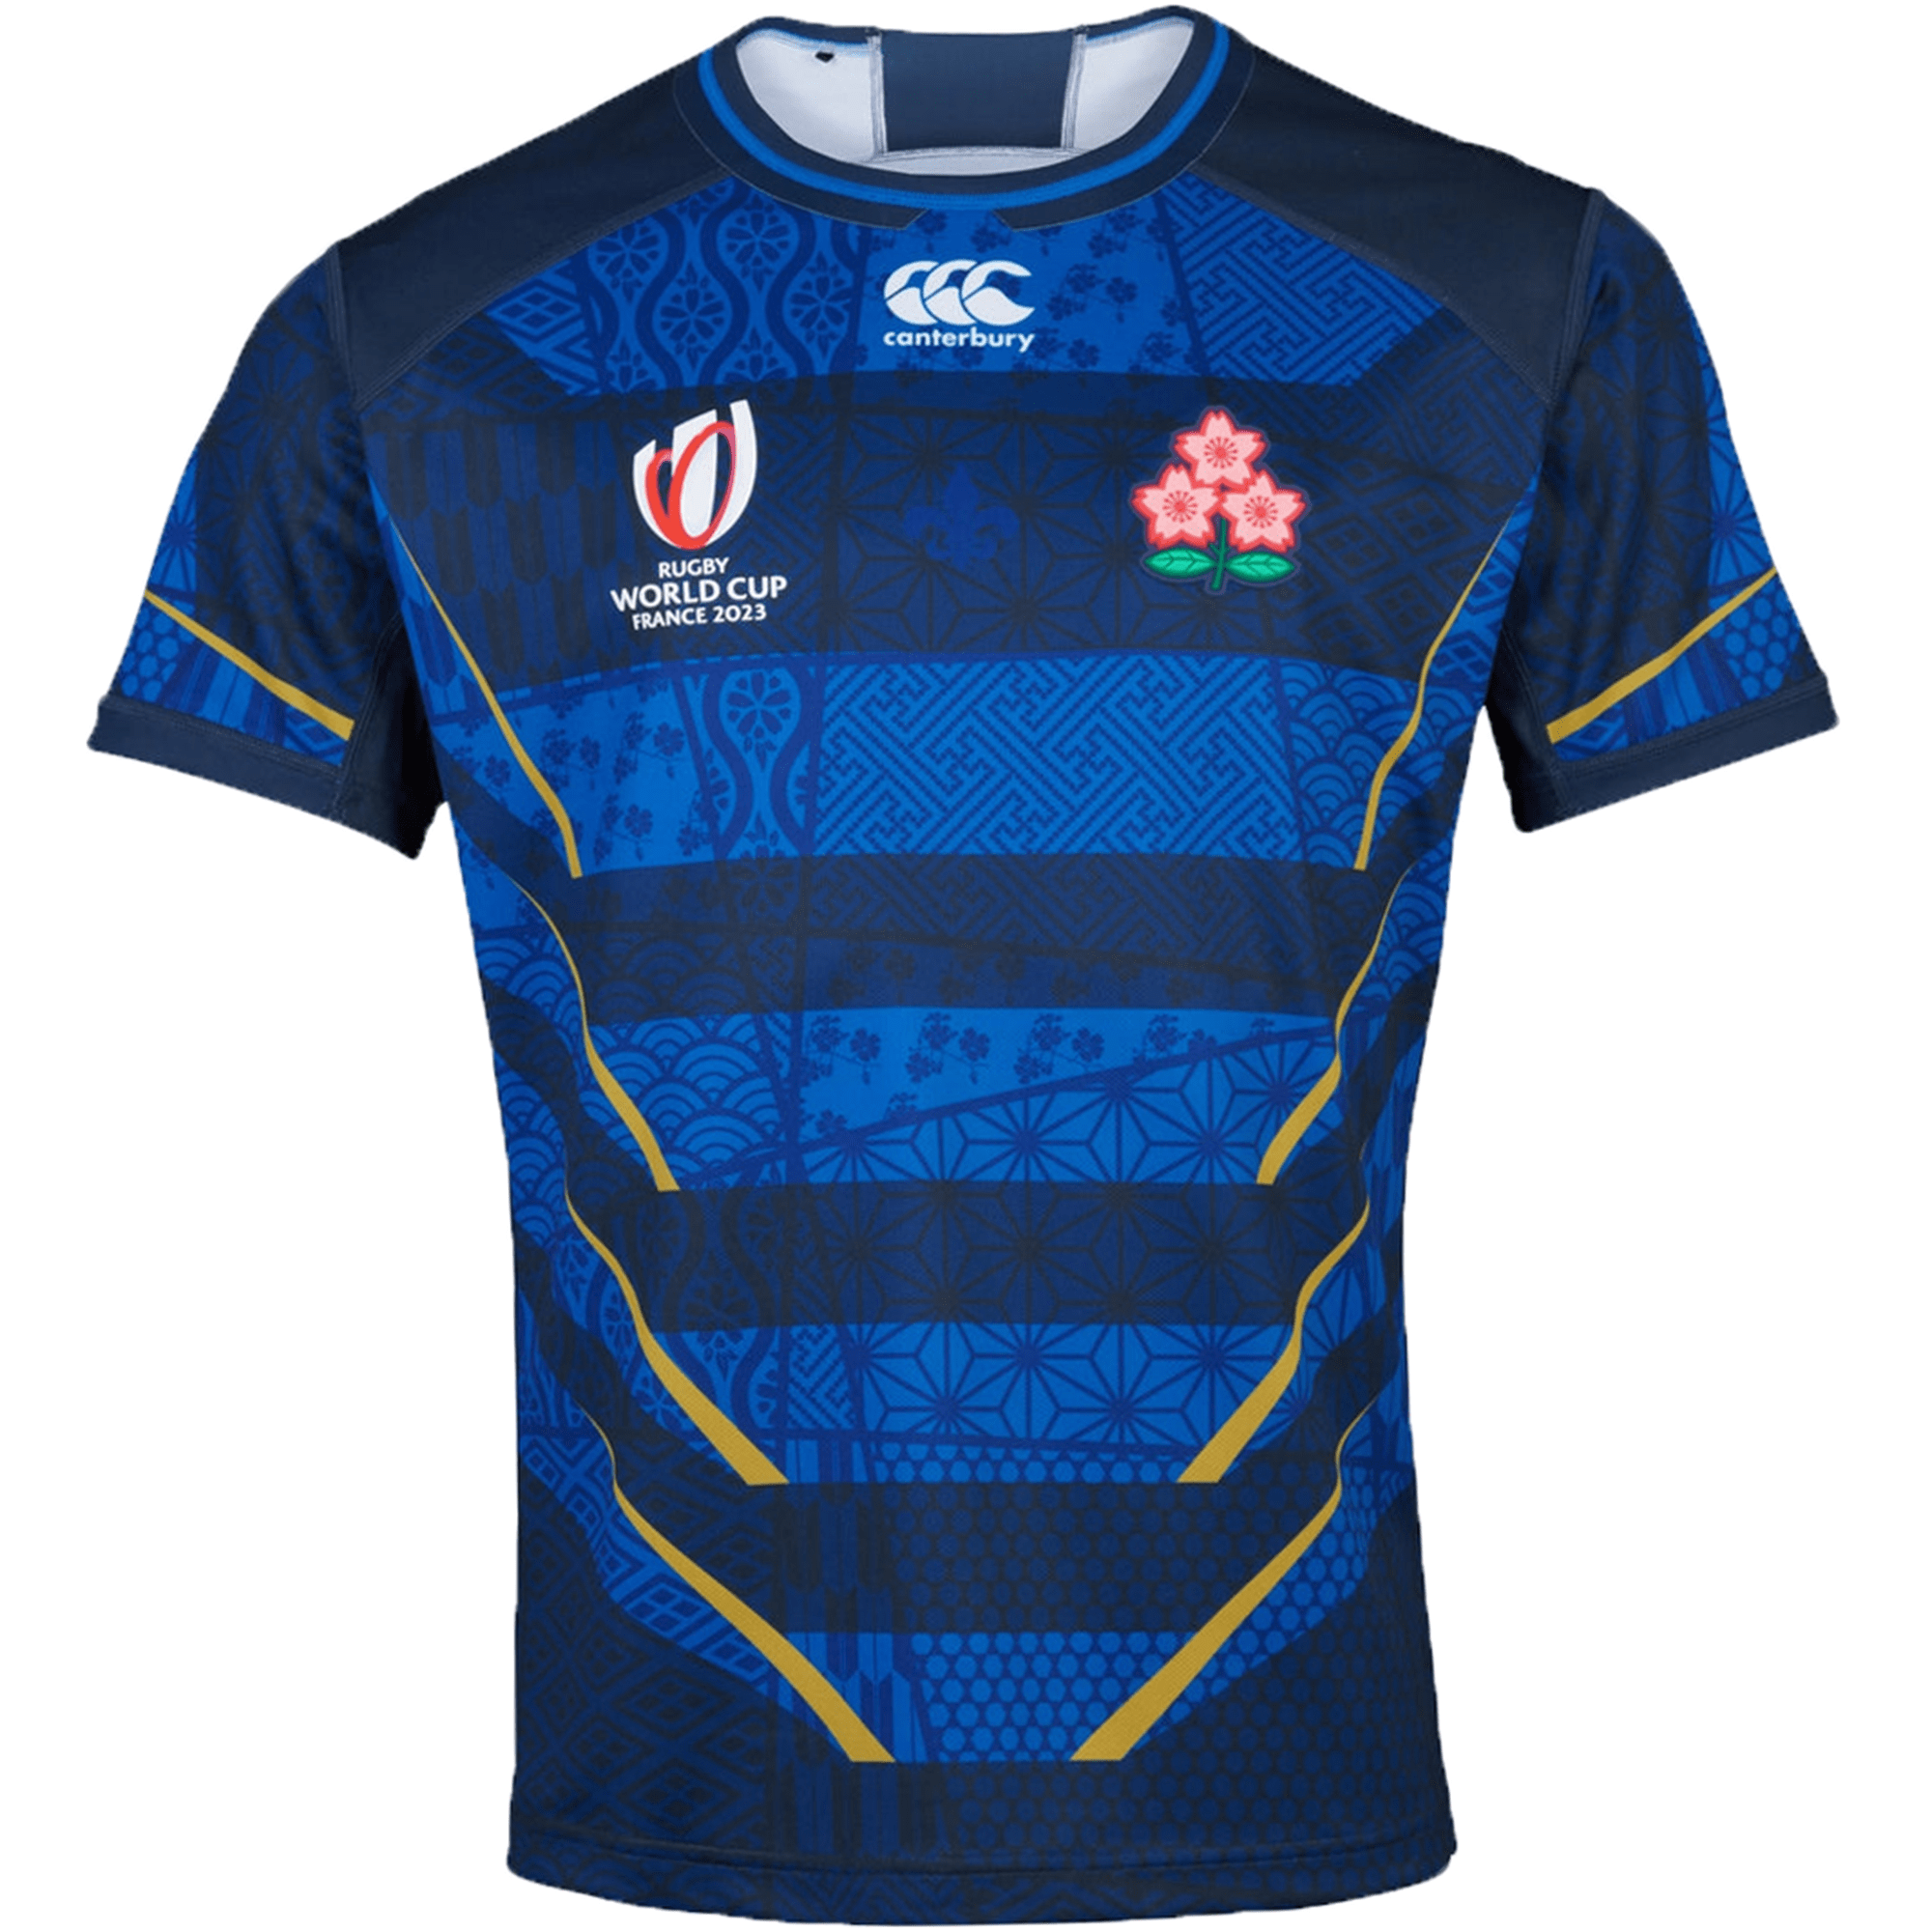 Japan Rugby World Cup 23 Replica Away Jersey by Canterbury | World ...